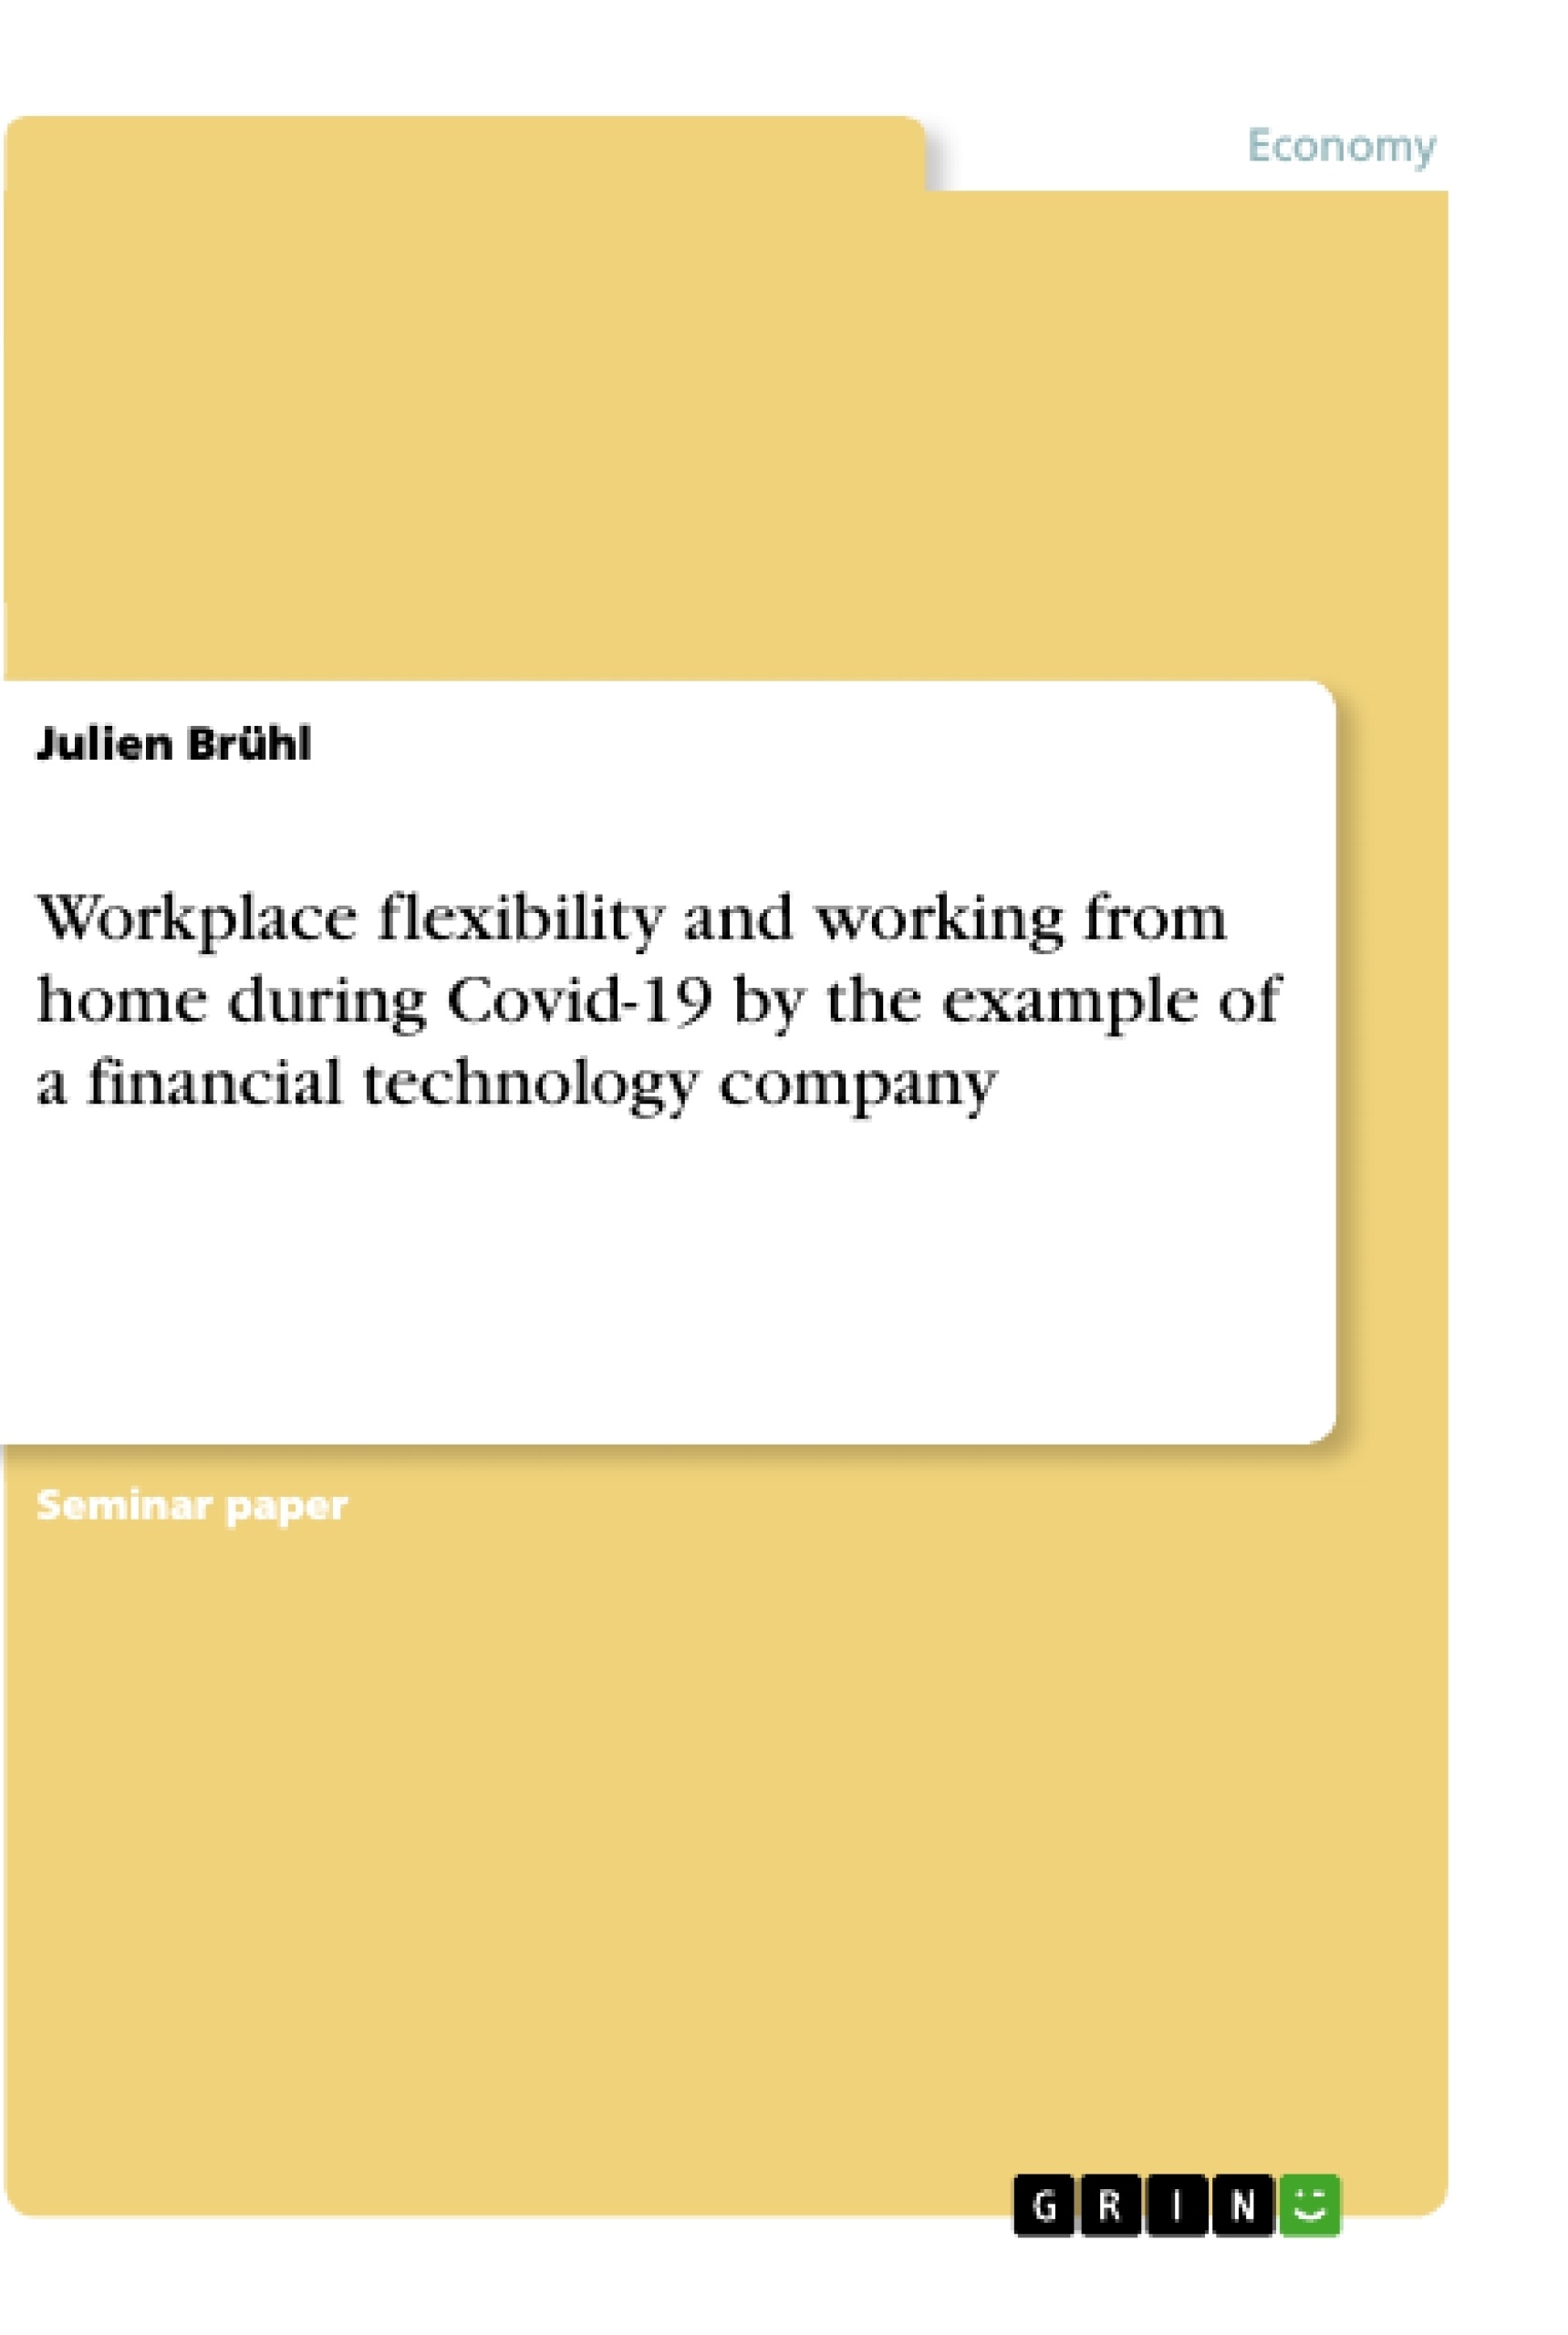 Título: Workplace flexibility and working from home during Covid-19 by the example of a financial technology company